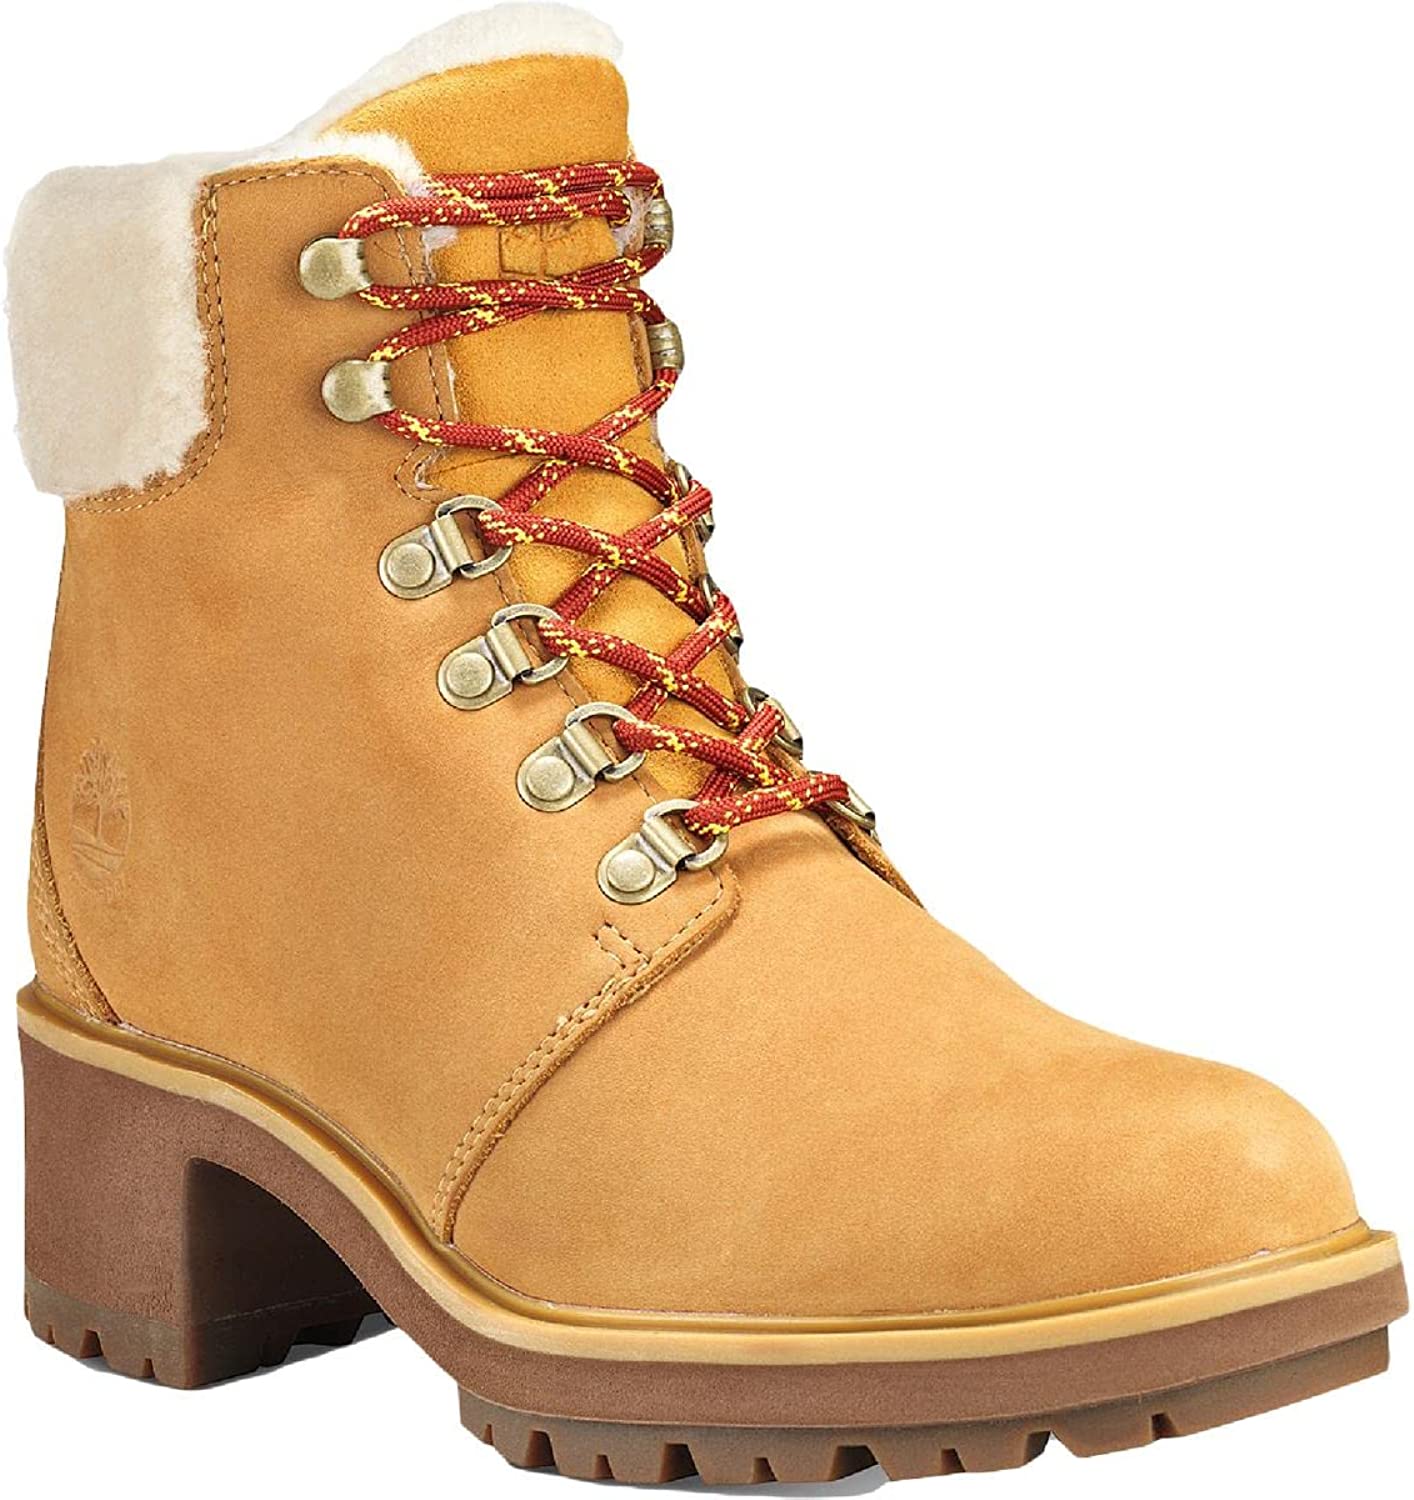 Timberland Womens Kinsley Leather Ankle Hiking Boots Tan 9 Medium (B,M)